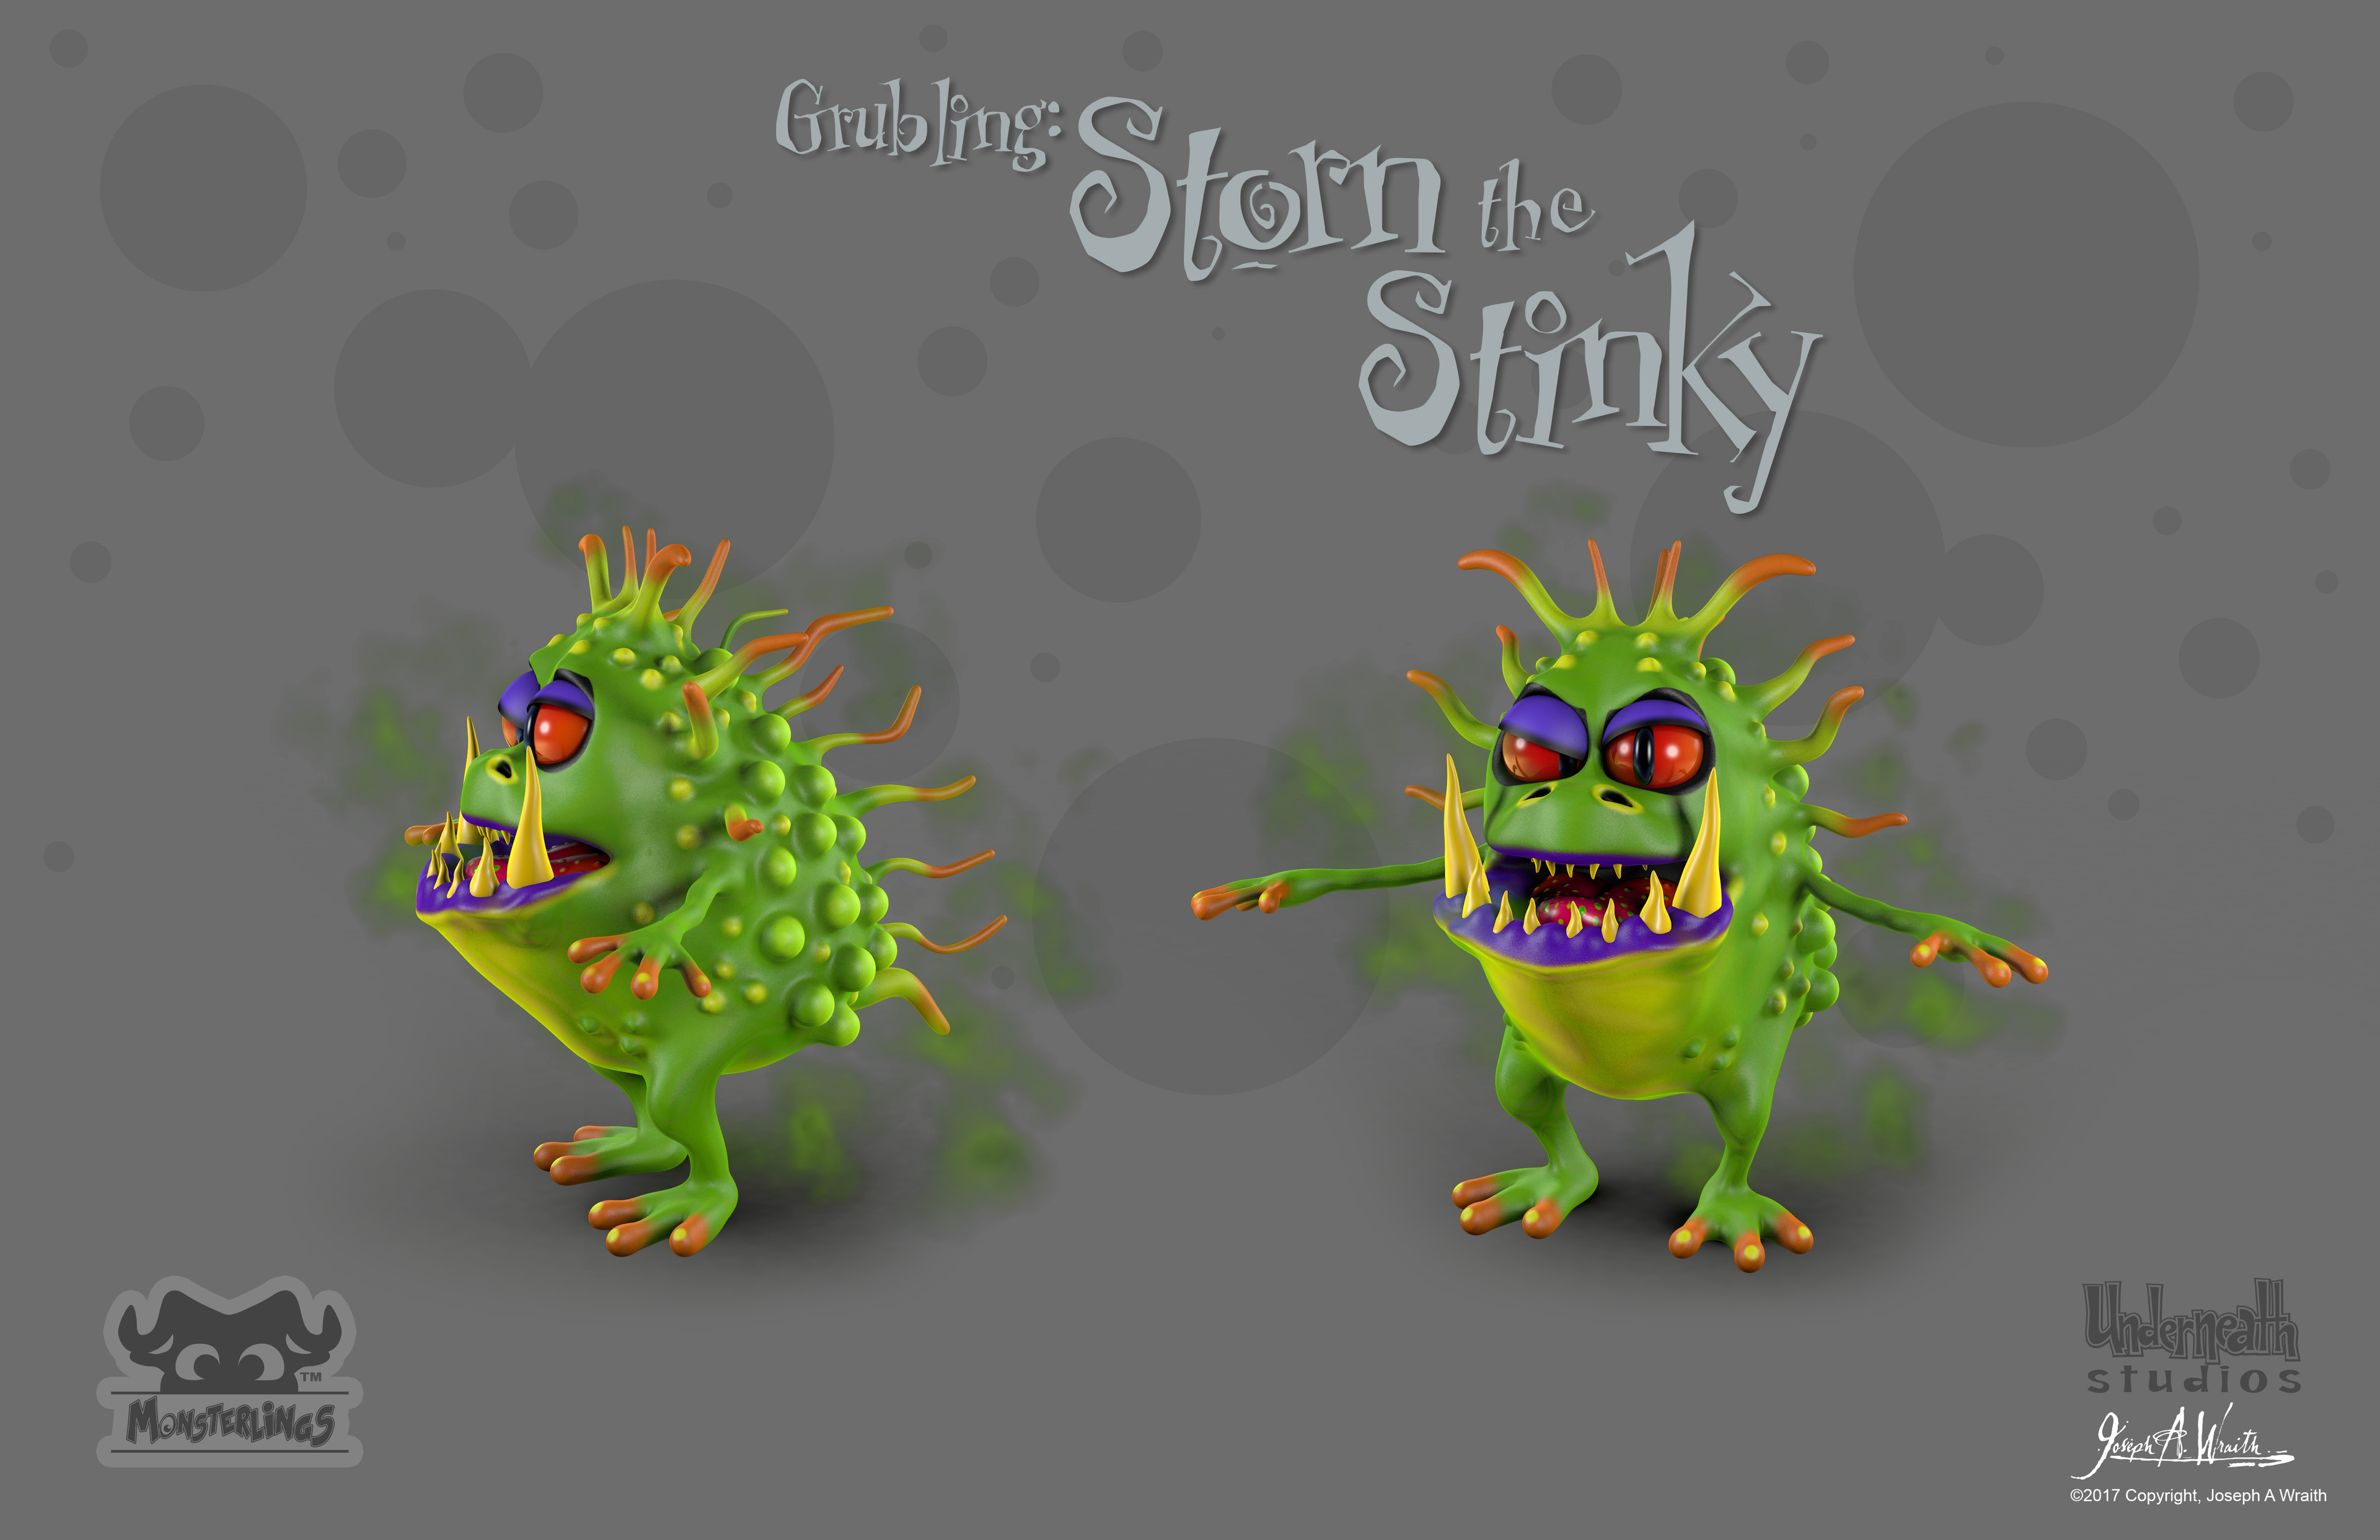 Storn the Stinky and somewhat obnoxious
©2017 Copyright, Joseph A. Wraith